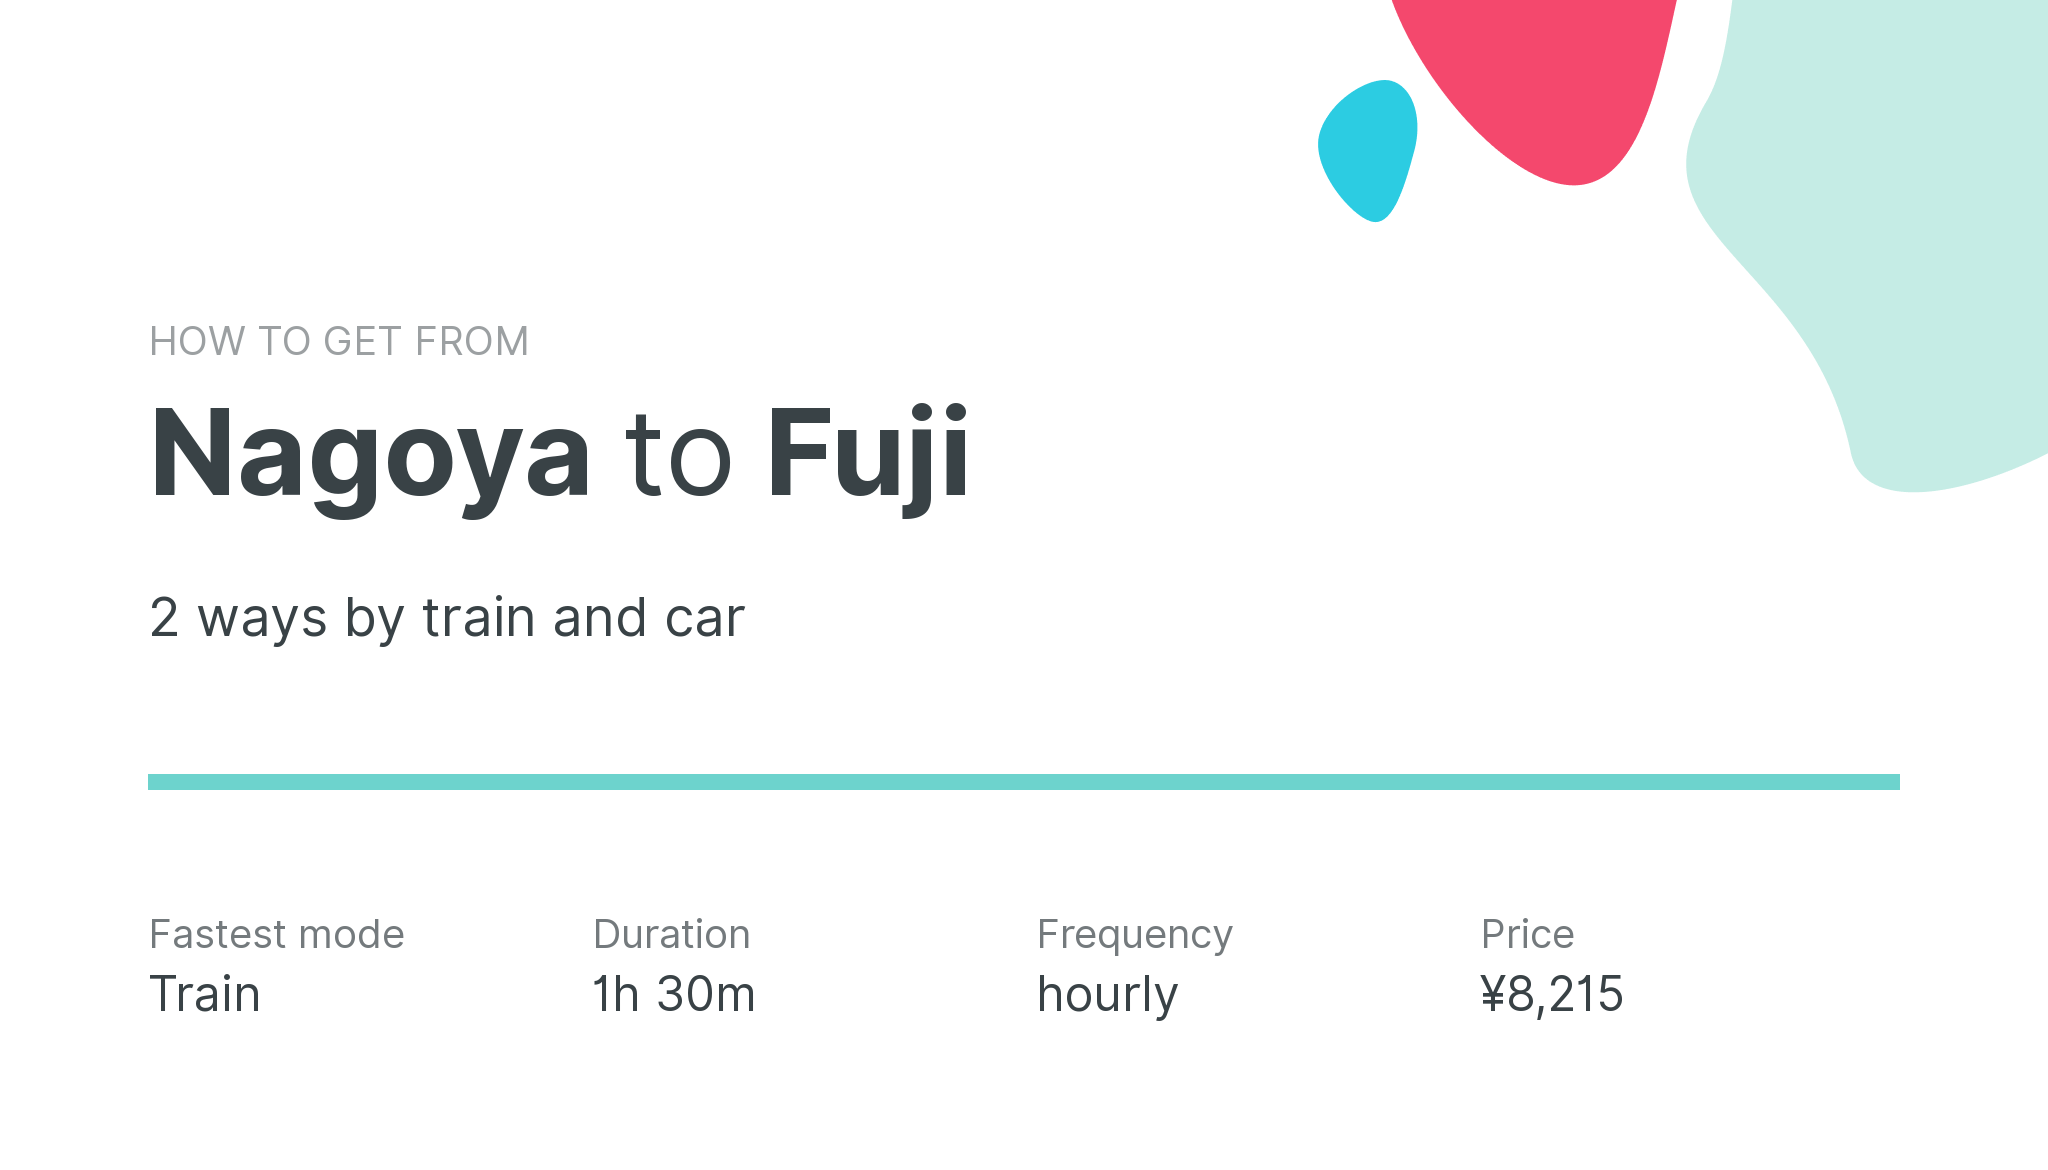 How do I get from Nagoya to Fuji